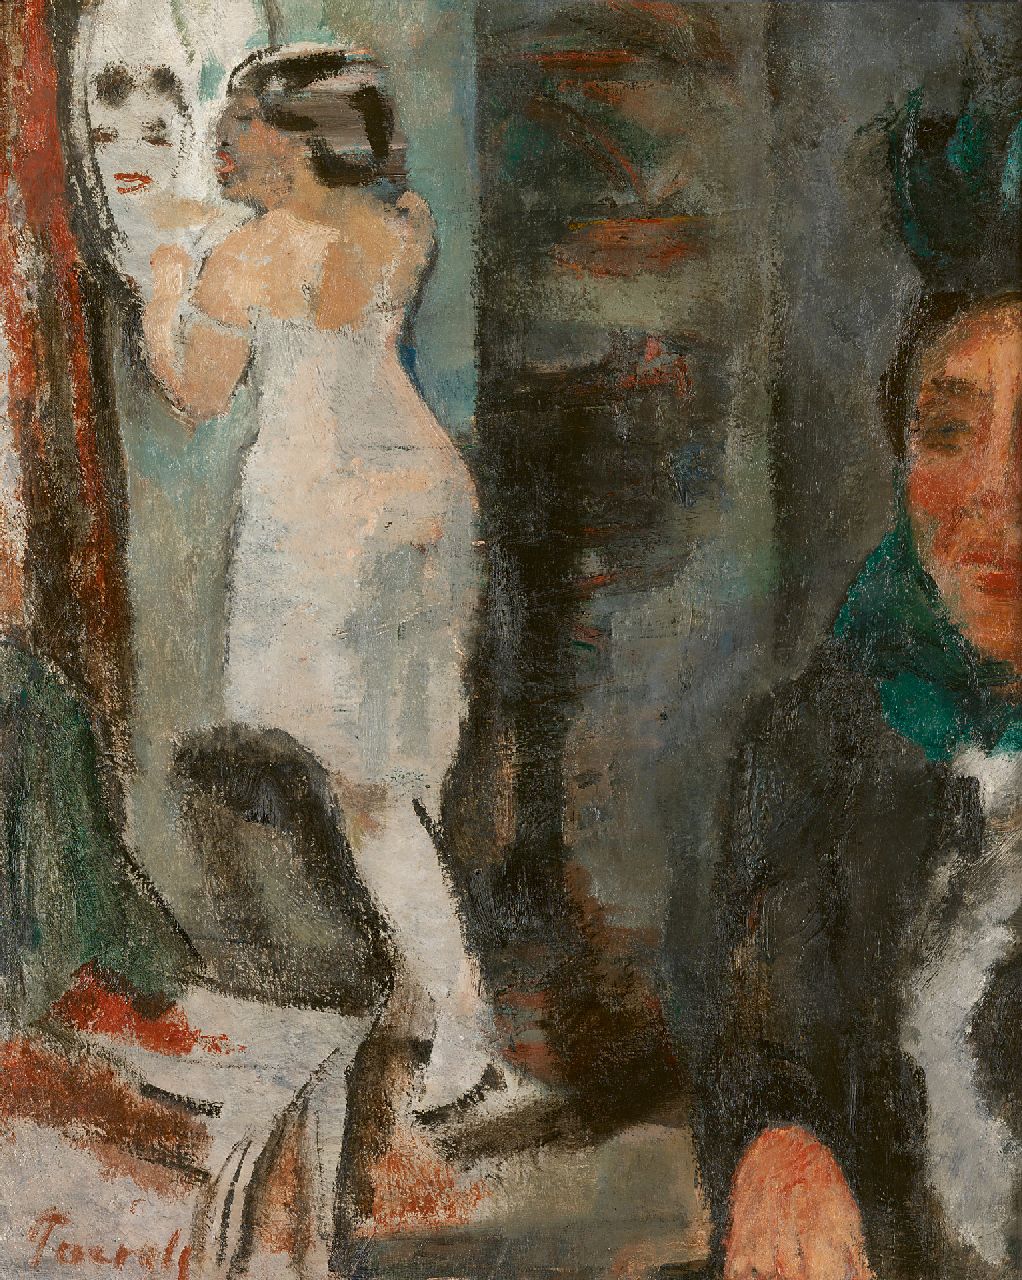 Paerels W.A.  | 'Willem' Adriaan Paerels | Paintings offered for sale | Woman at a mirror, oil on canvas 50.0 x 40.0 cm, signed l.l. and painted 1922